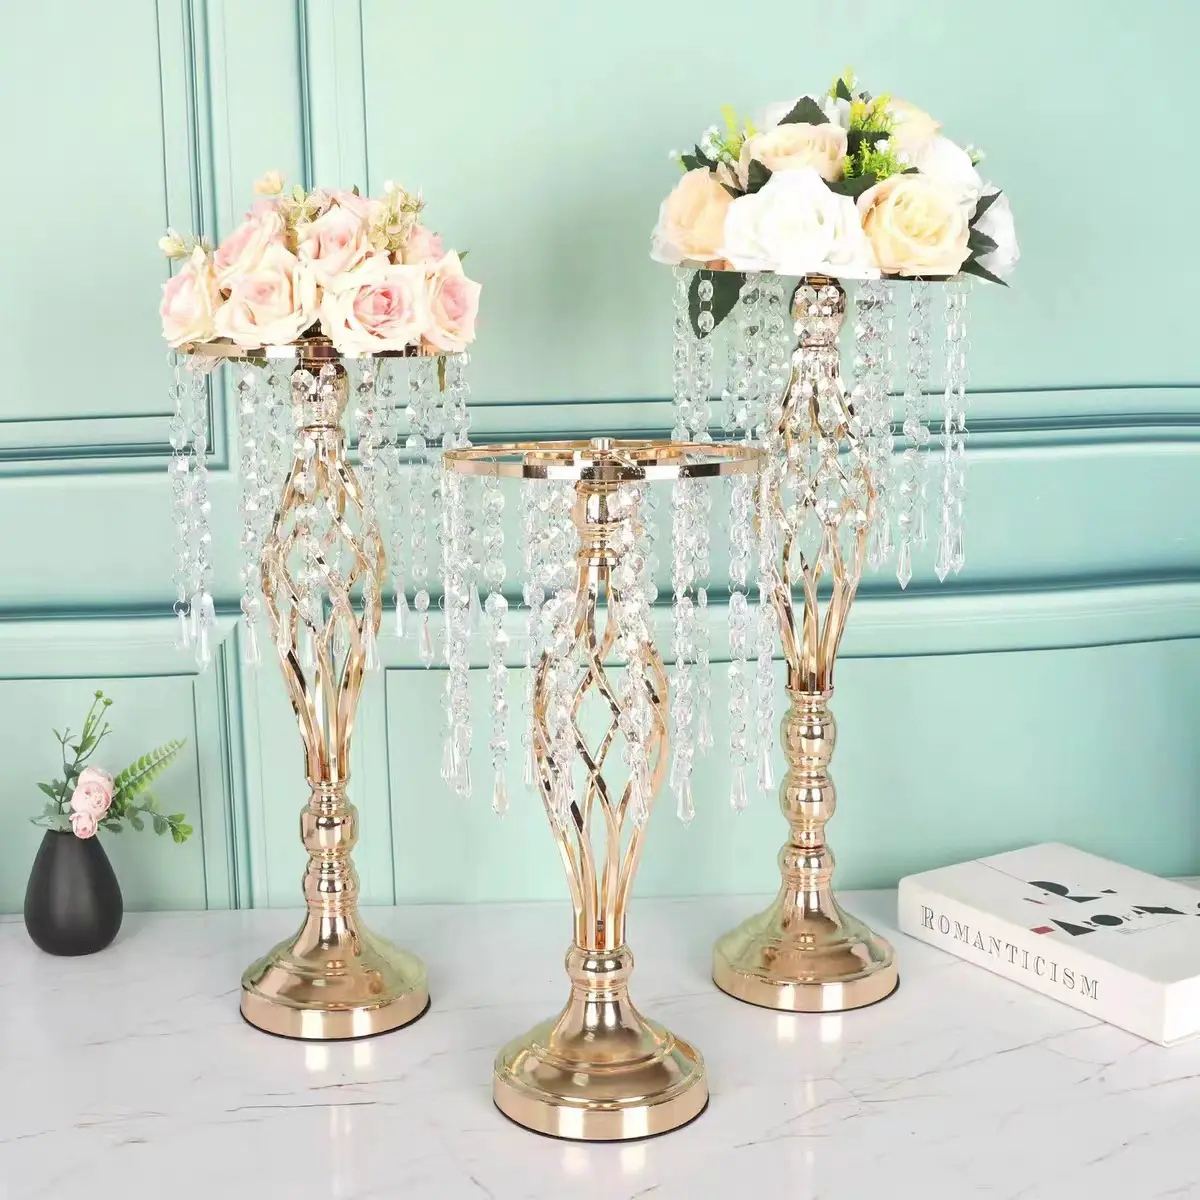 NISEVEN Creative Wedding Centerpieces Table Decorations Metal Gold Silver Flowers Stand With Chandelier Crystal